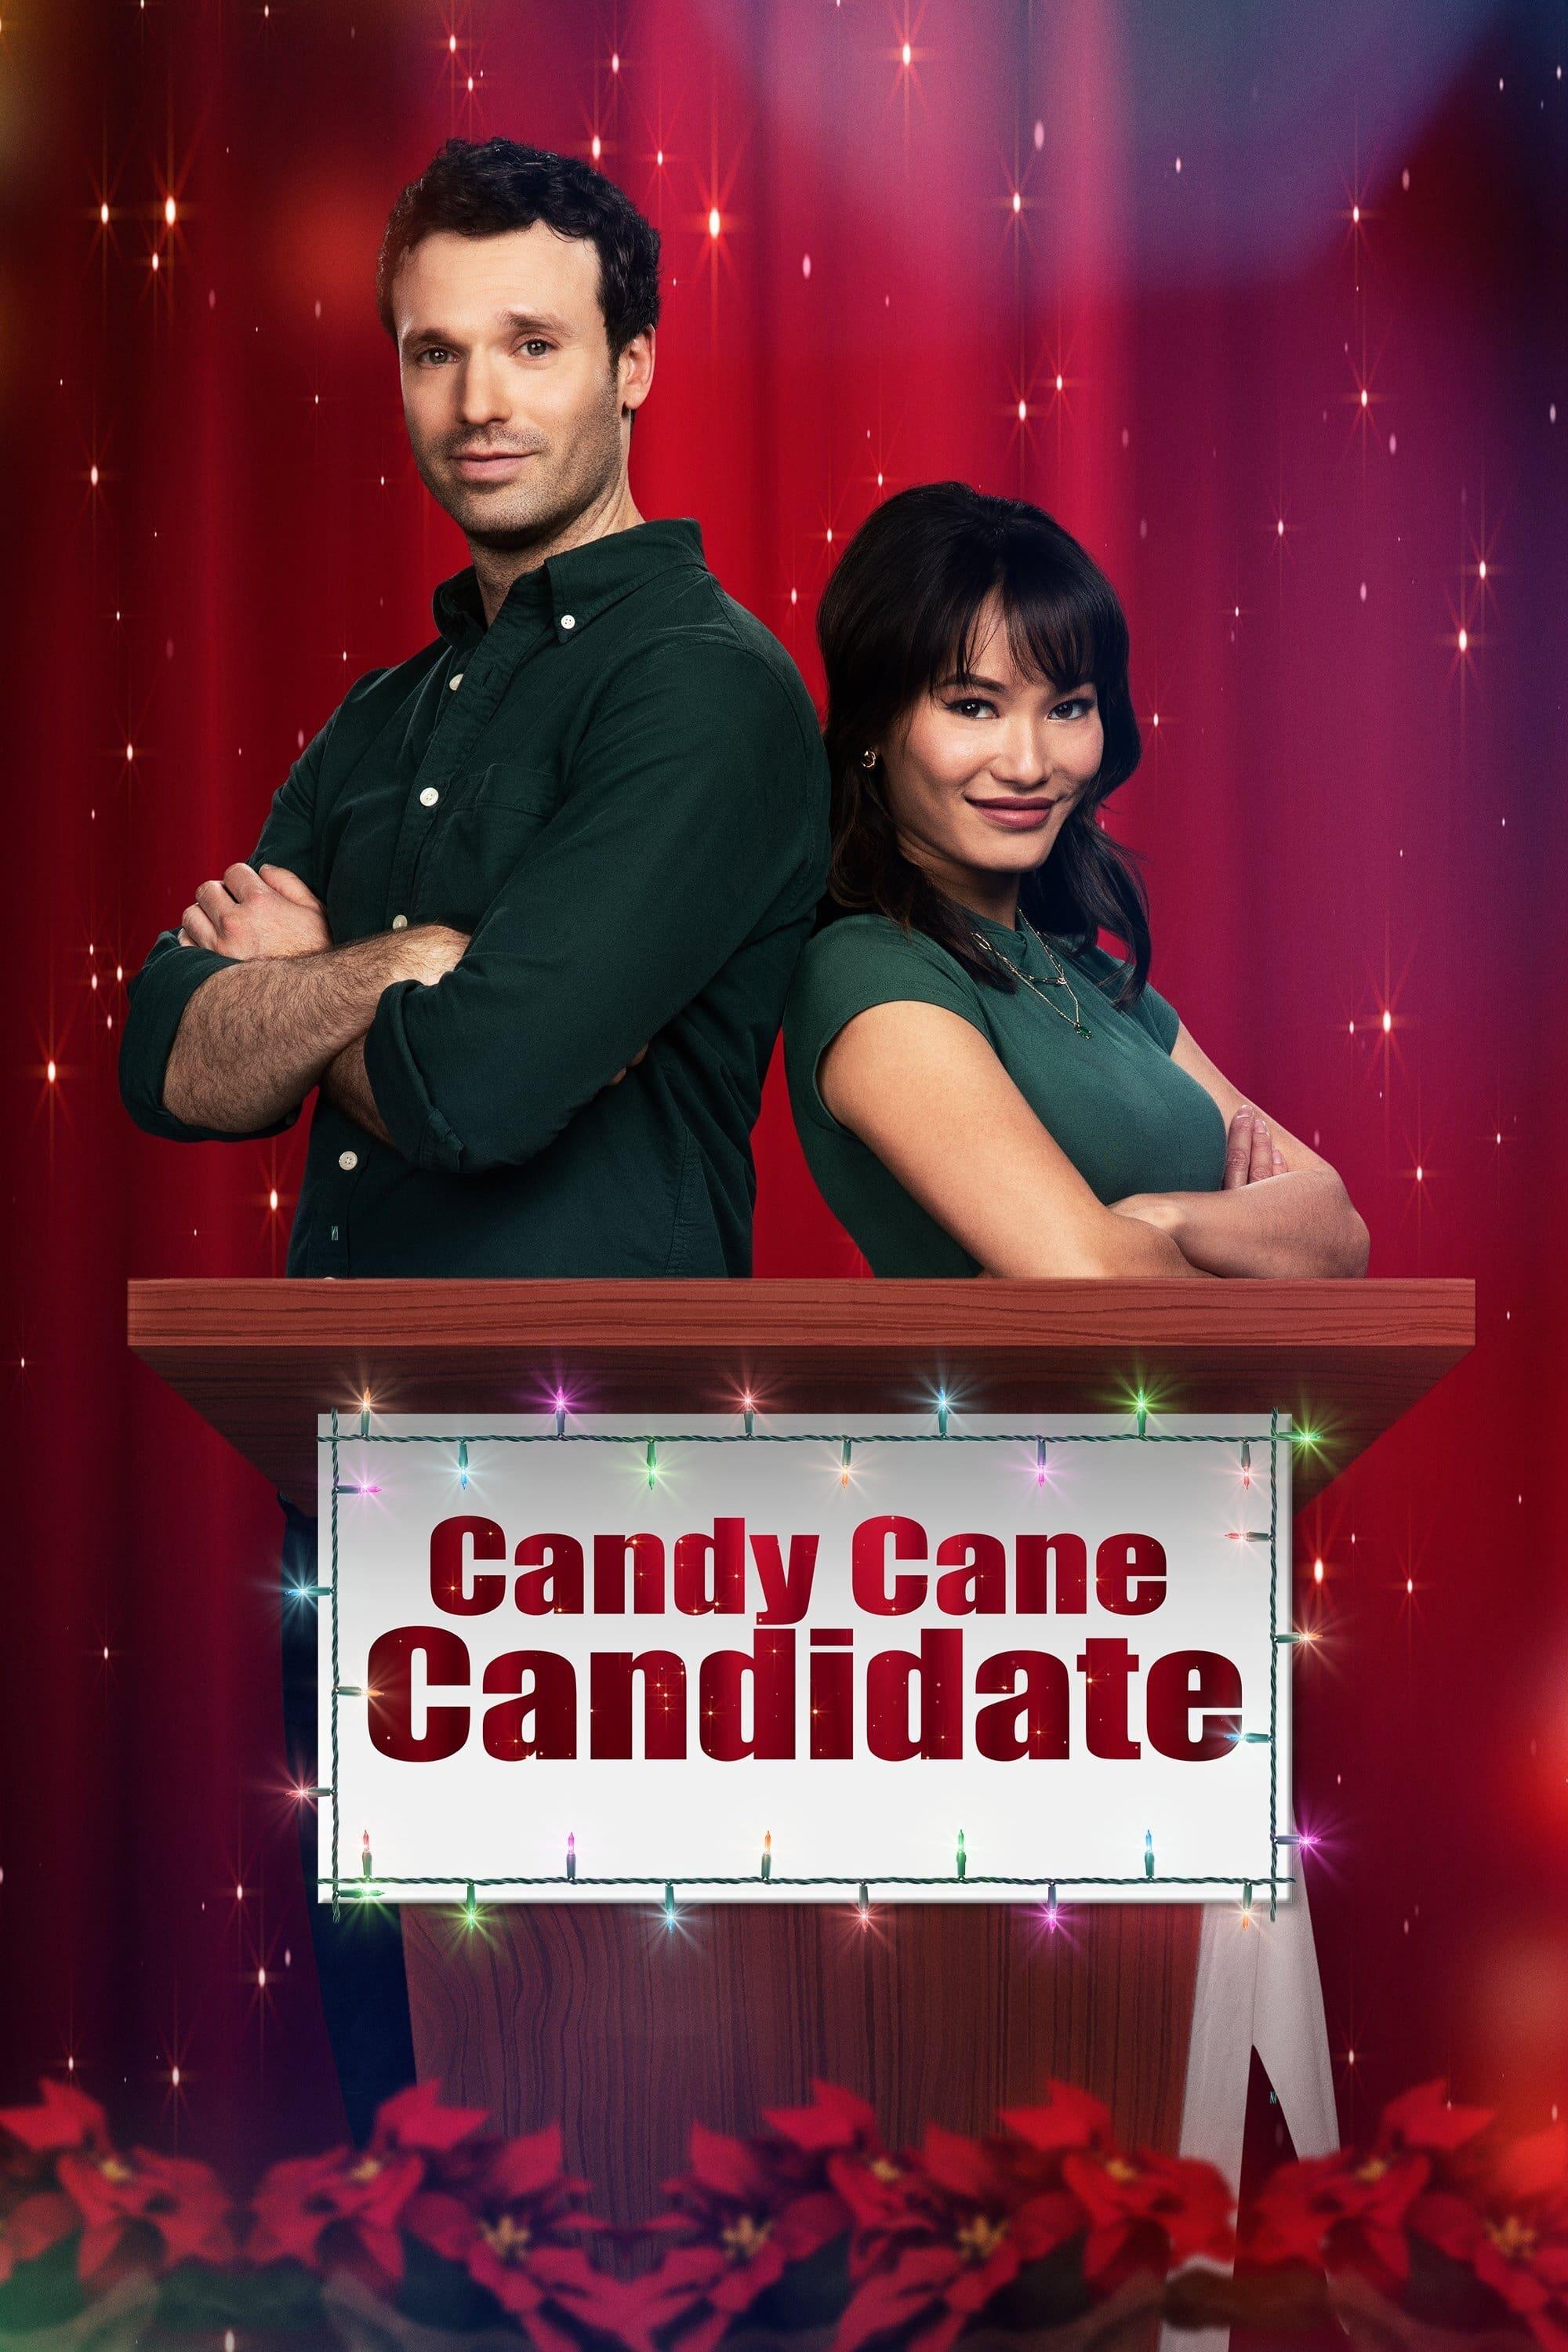 Candy Cane Candidate poster